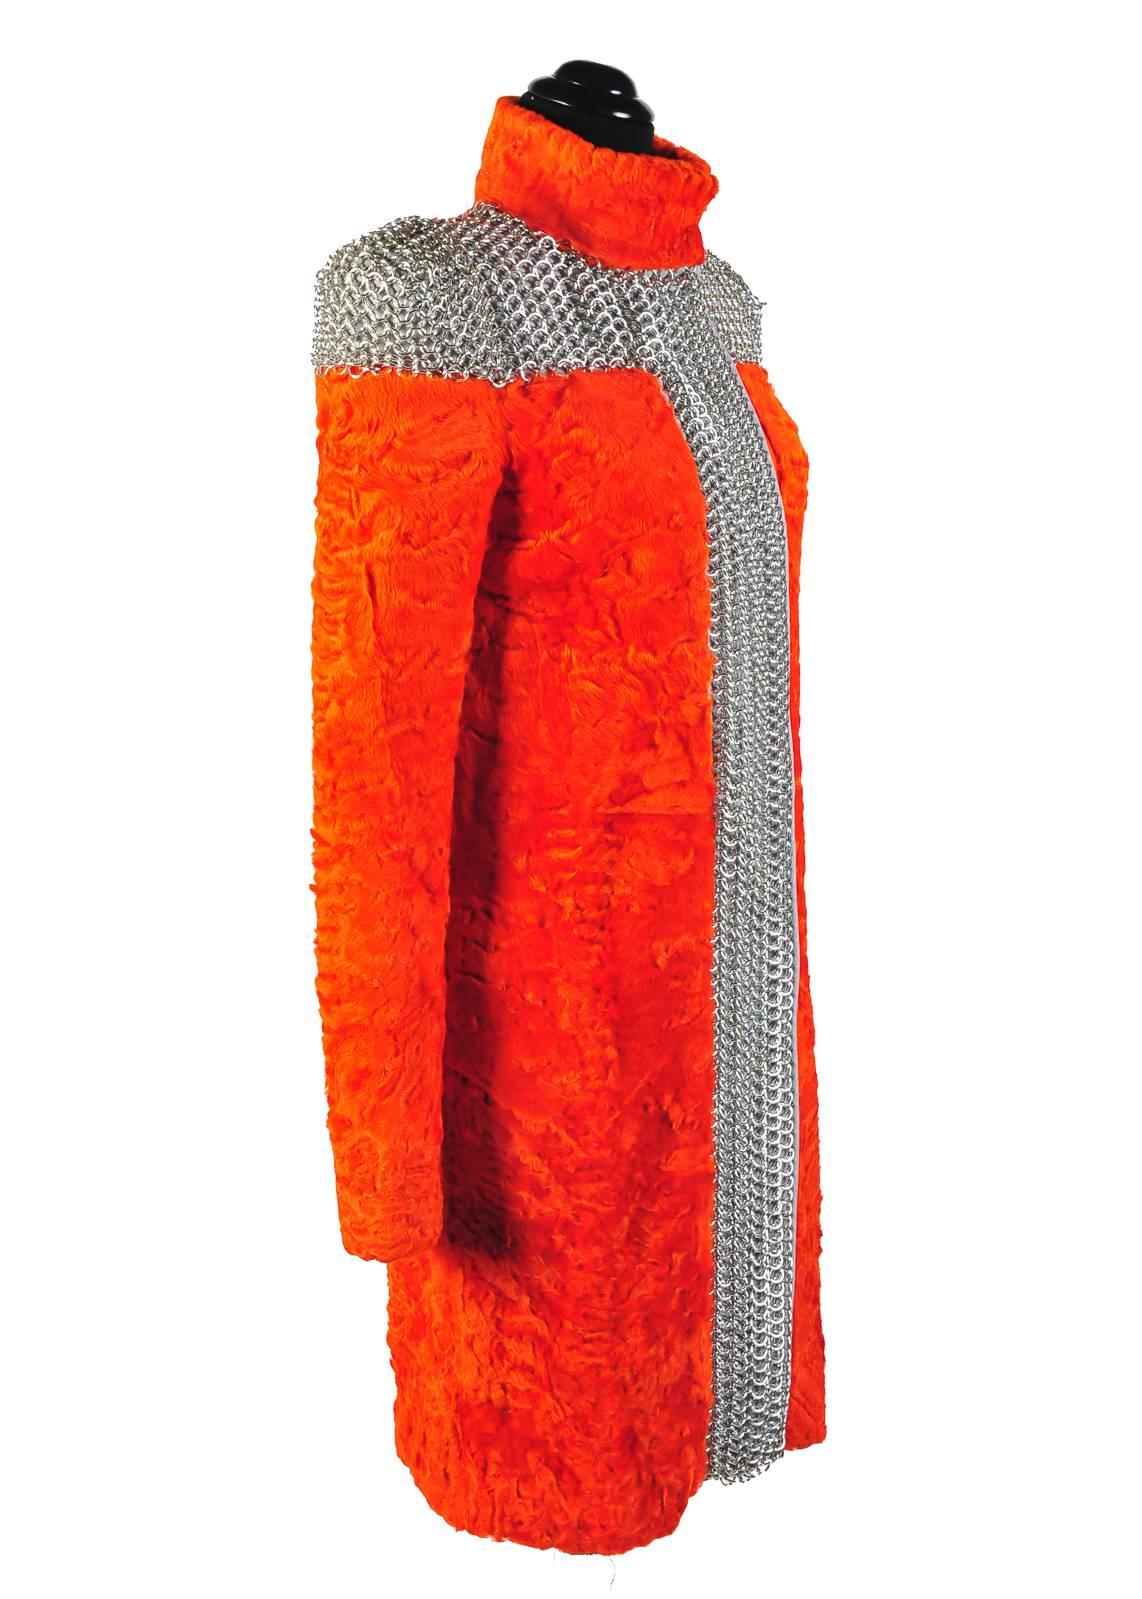 VERSACE

ORANGE PERSIAN FUR METAL MESH COAT

 Versace's coat is the ultimate luxury for the fashion-forward. 

IT Size 38, US 2

Guaranteed to turn heads & stop traffic whenever & wherever you wear it!

Made in Italy

Brand new, with